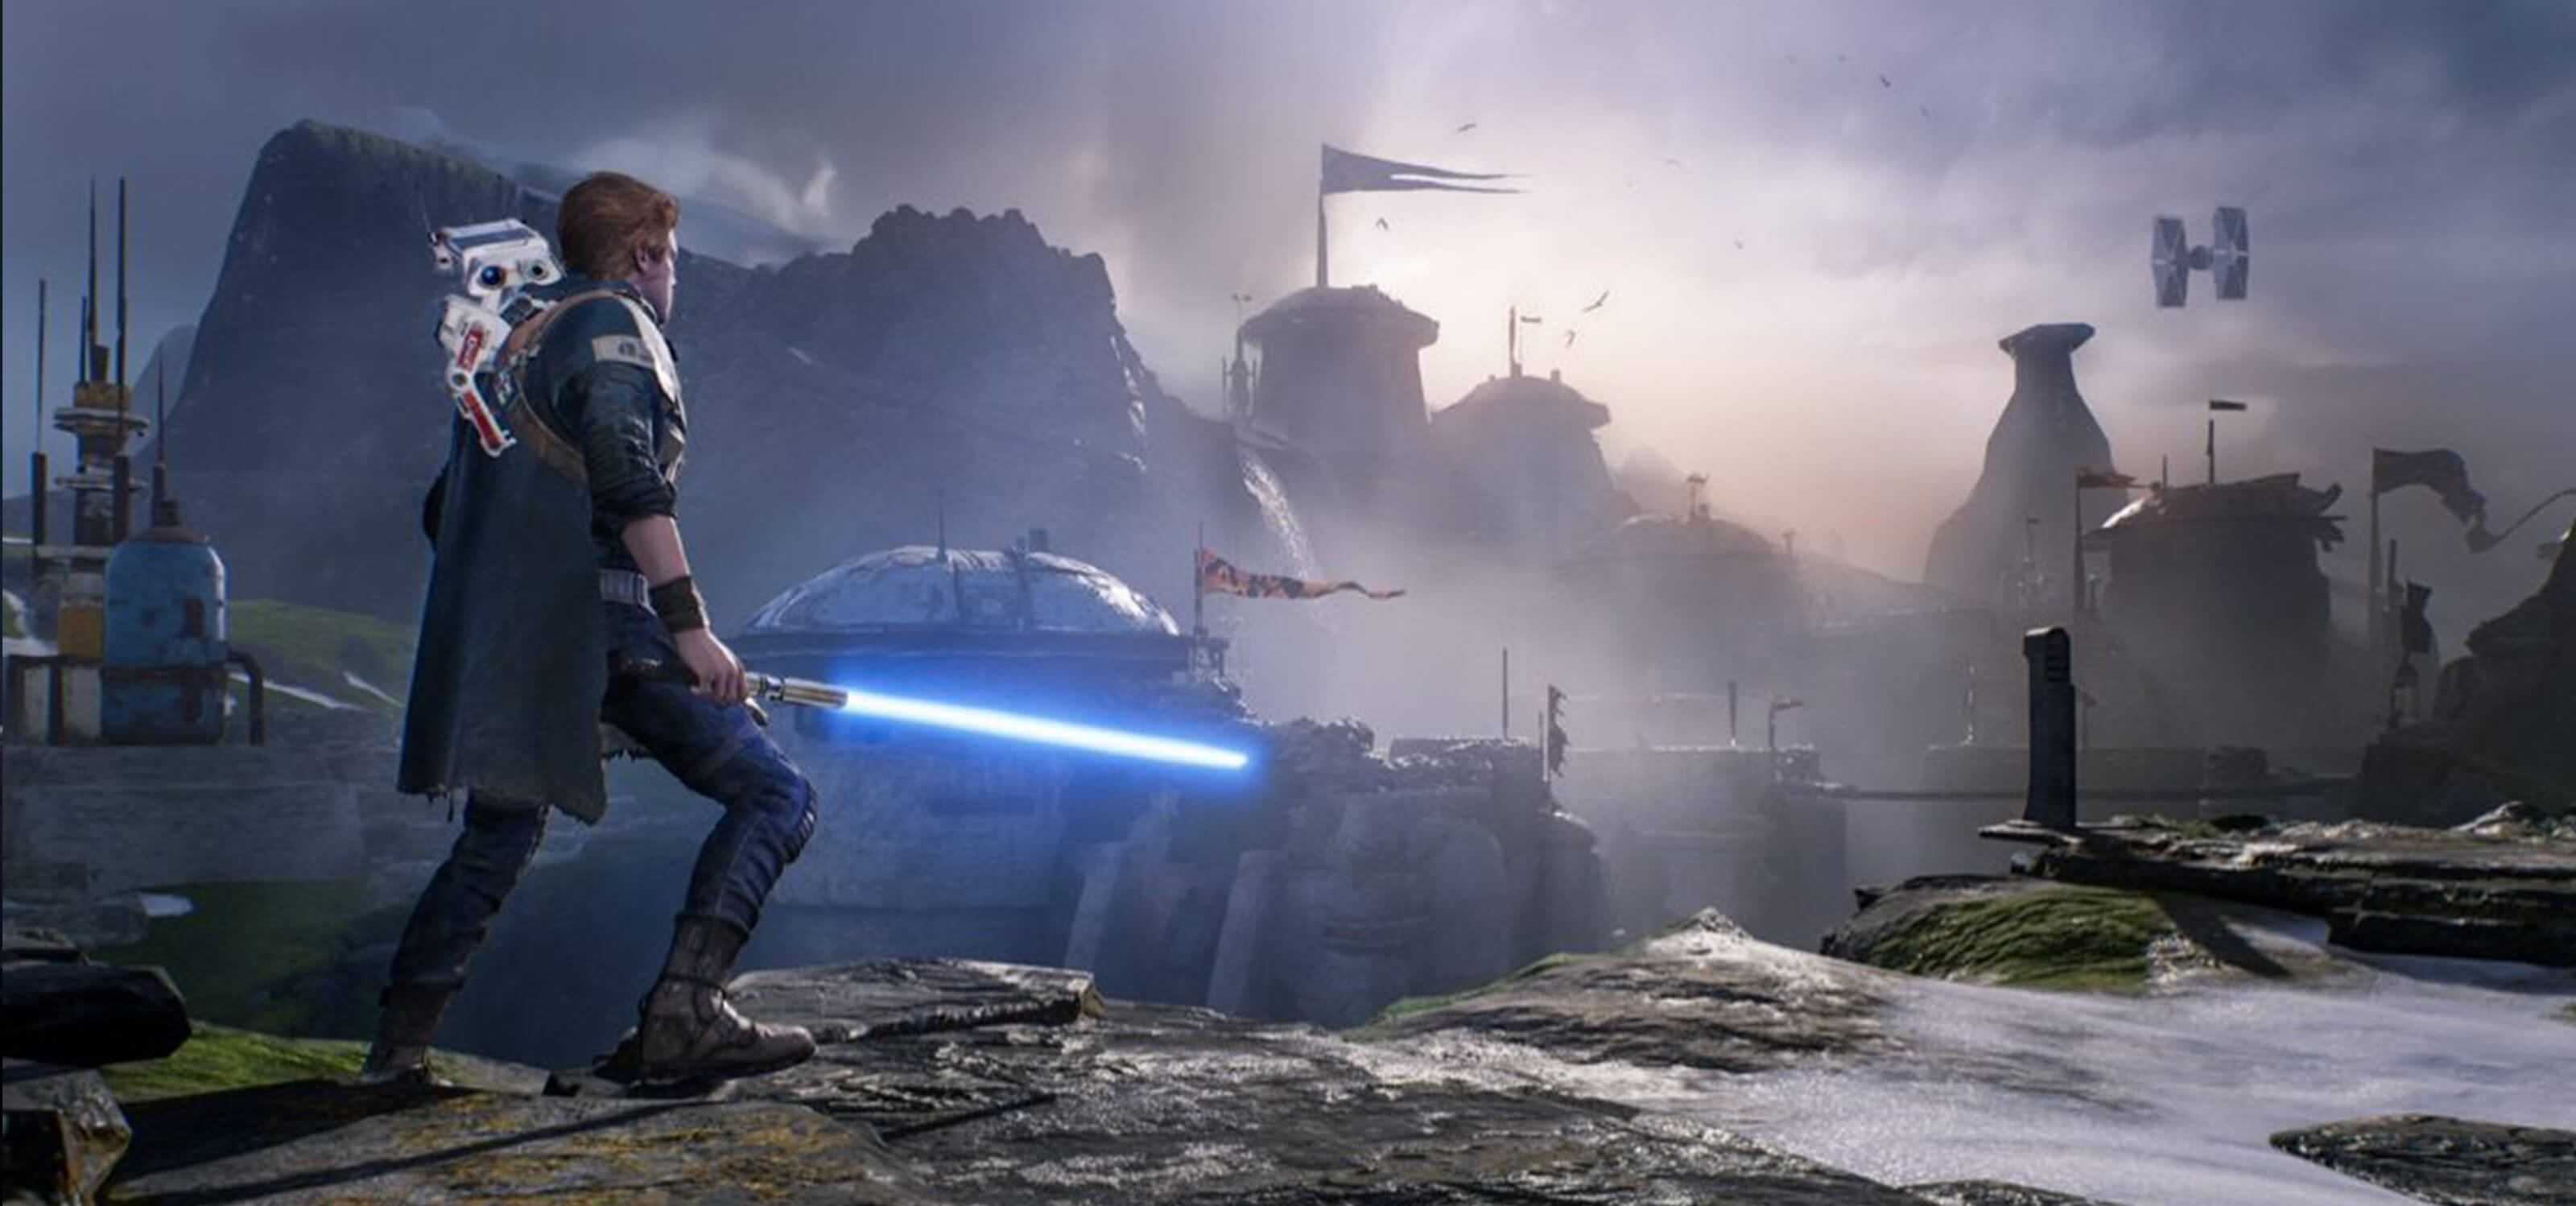 Star Wars Jedi: Fallen Order’s hero, Cal Kestis, wields his lightsaber and looks out at a rocky landscape while a small droid rides on his back.